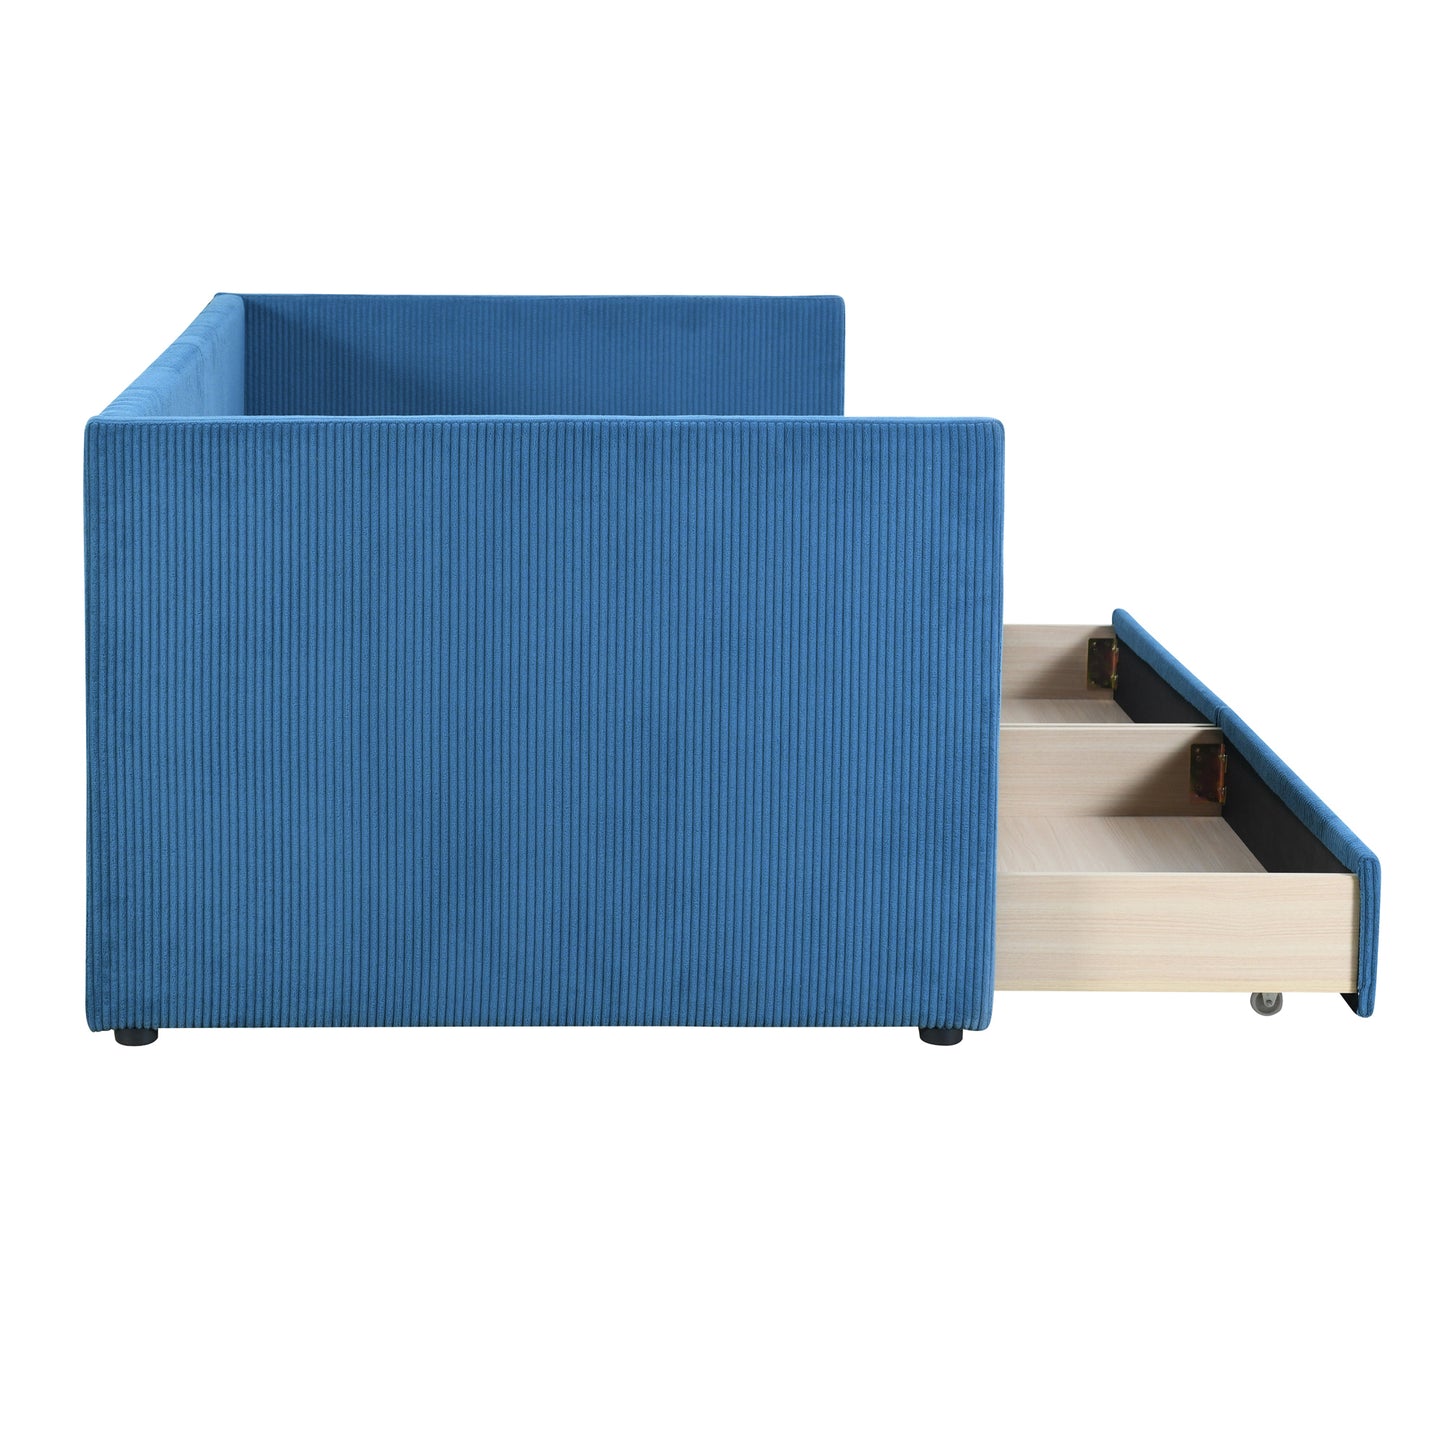 Twin Size Corduroy Daybed with Two Drawers and Wood Slat, Blue